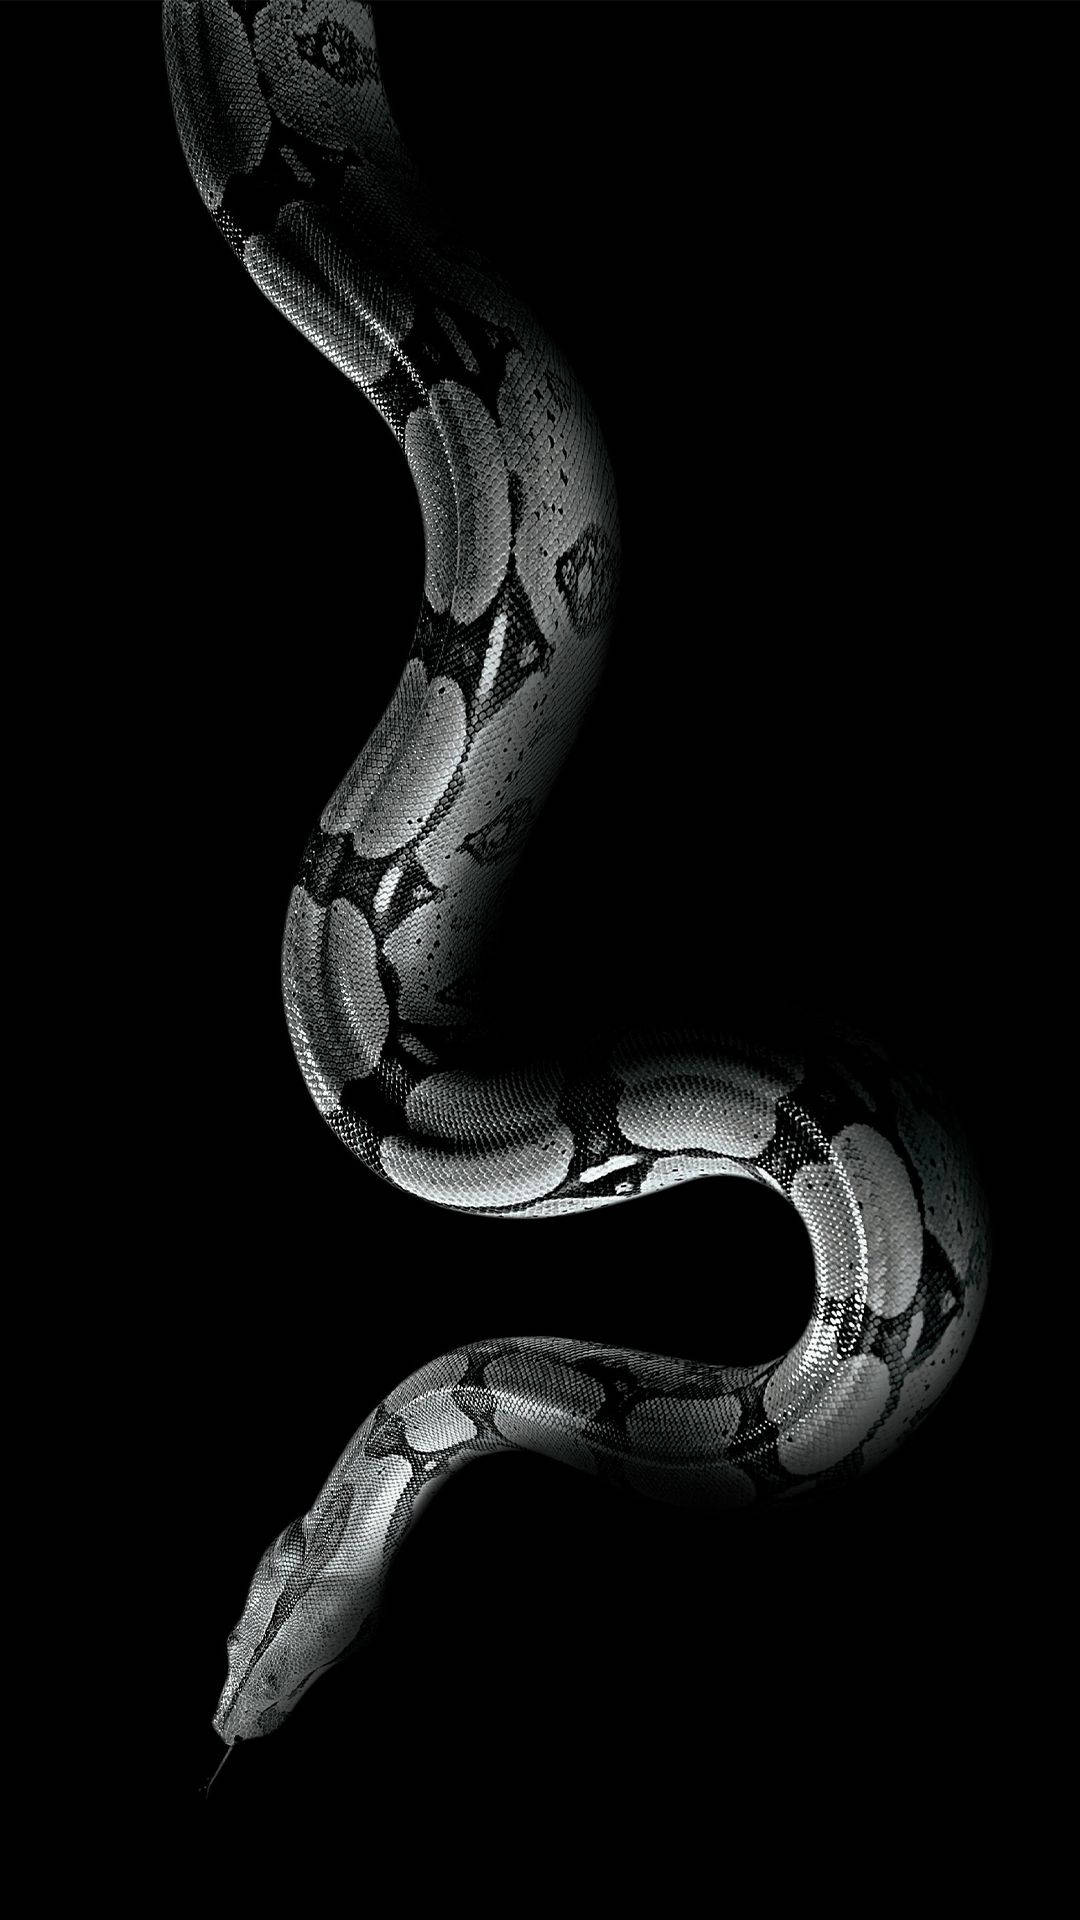 Boa Constrictor Africa Iphone Background